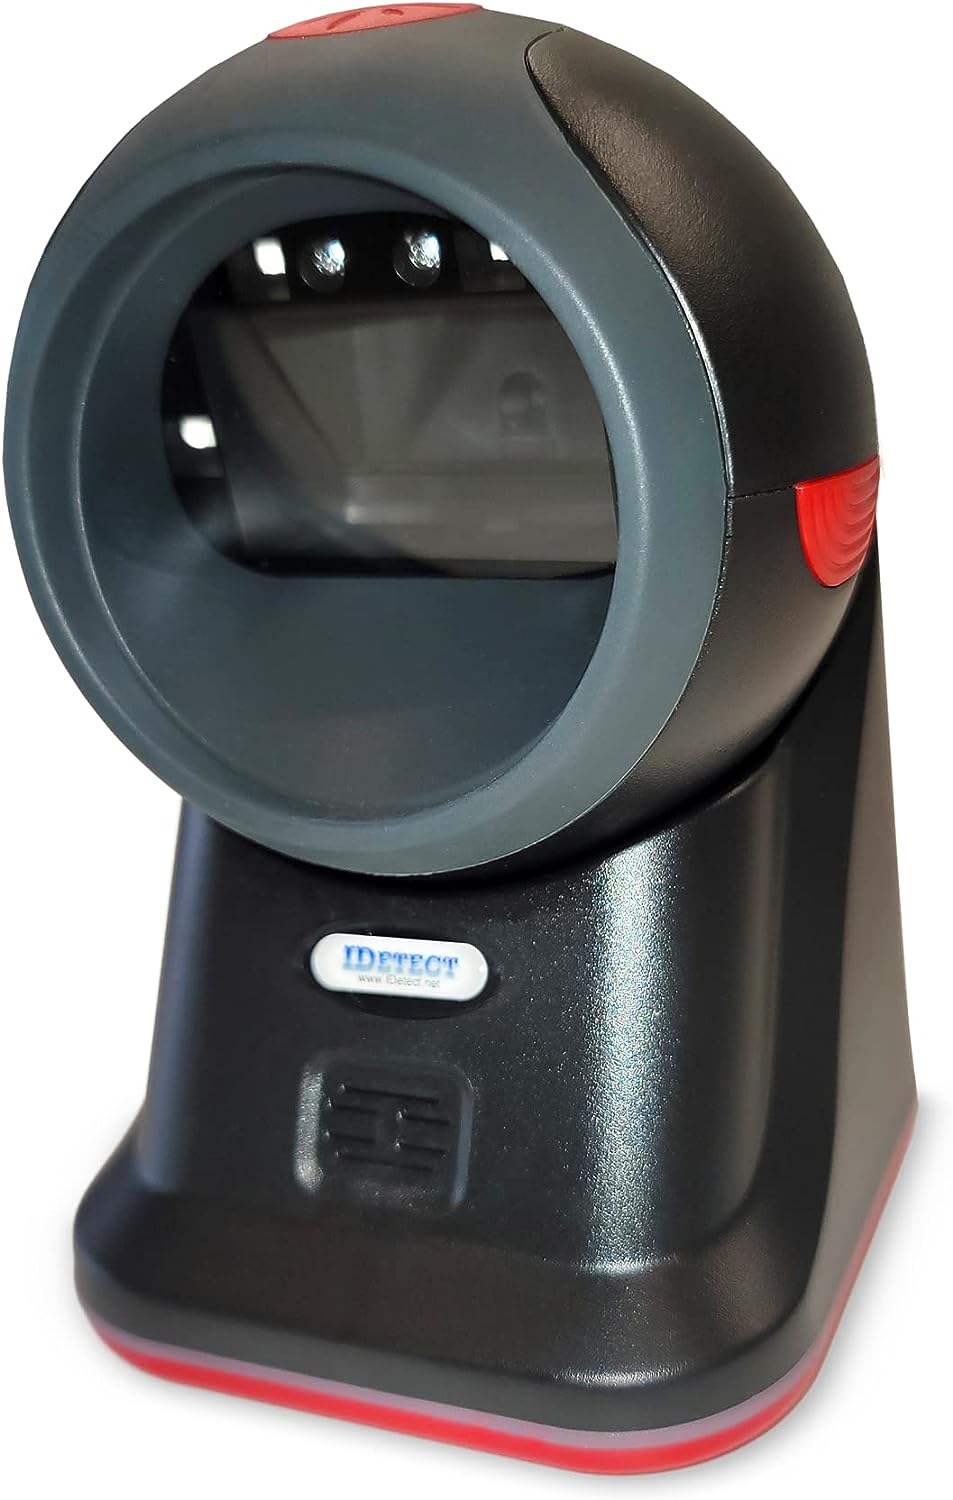 IDetect ID Scanner - Age Verification ID Scanner for [...]